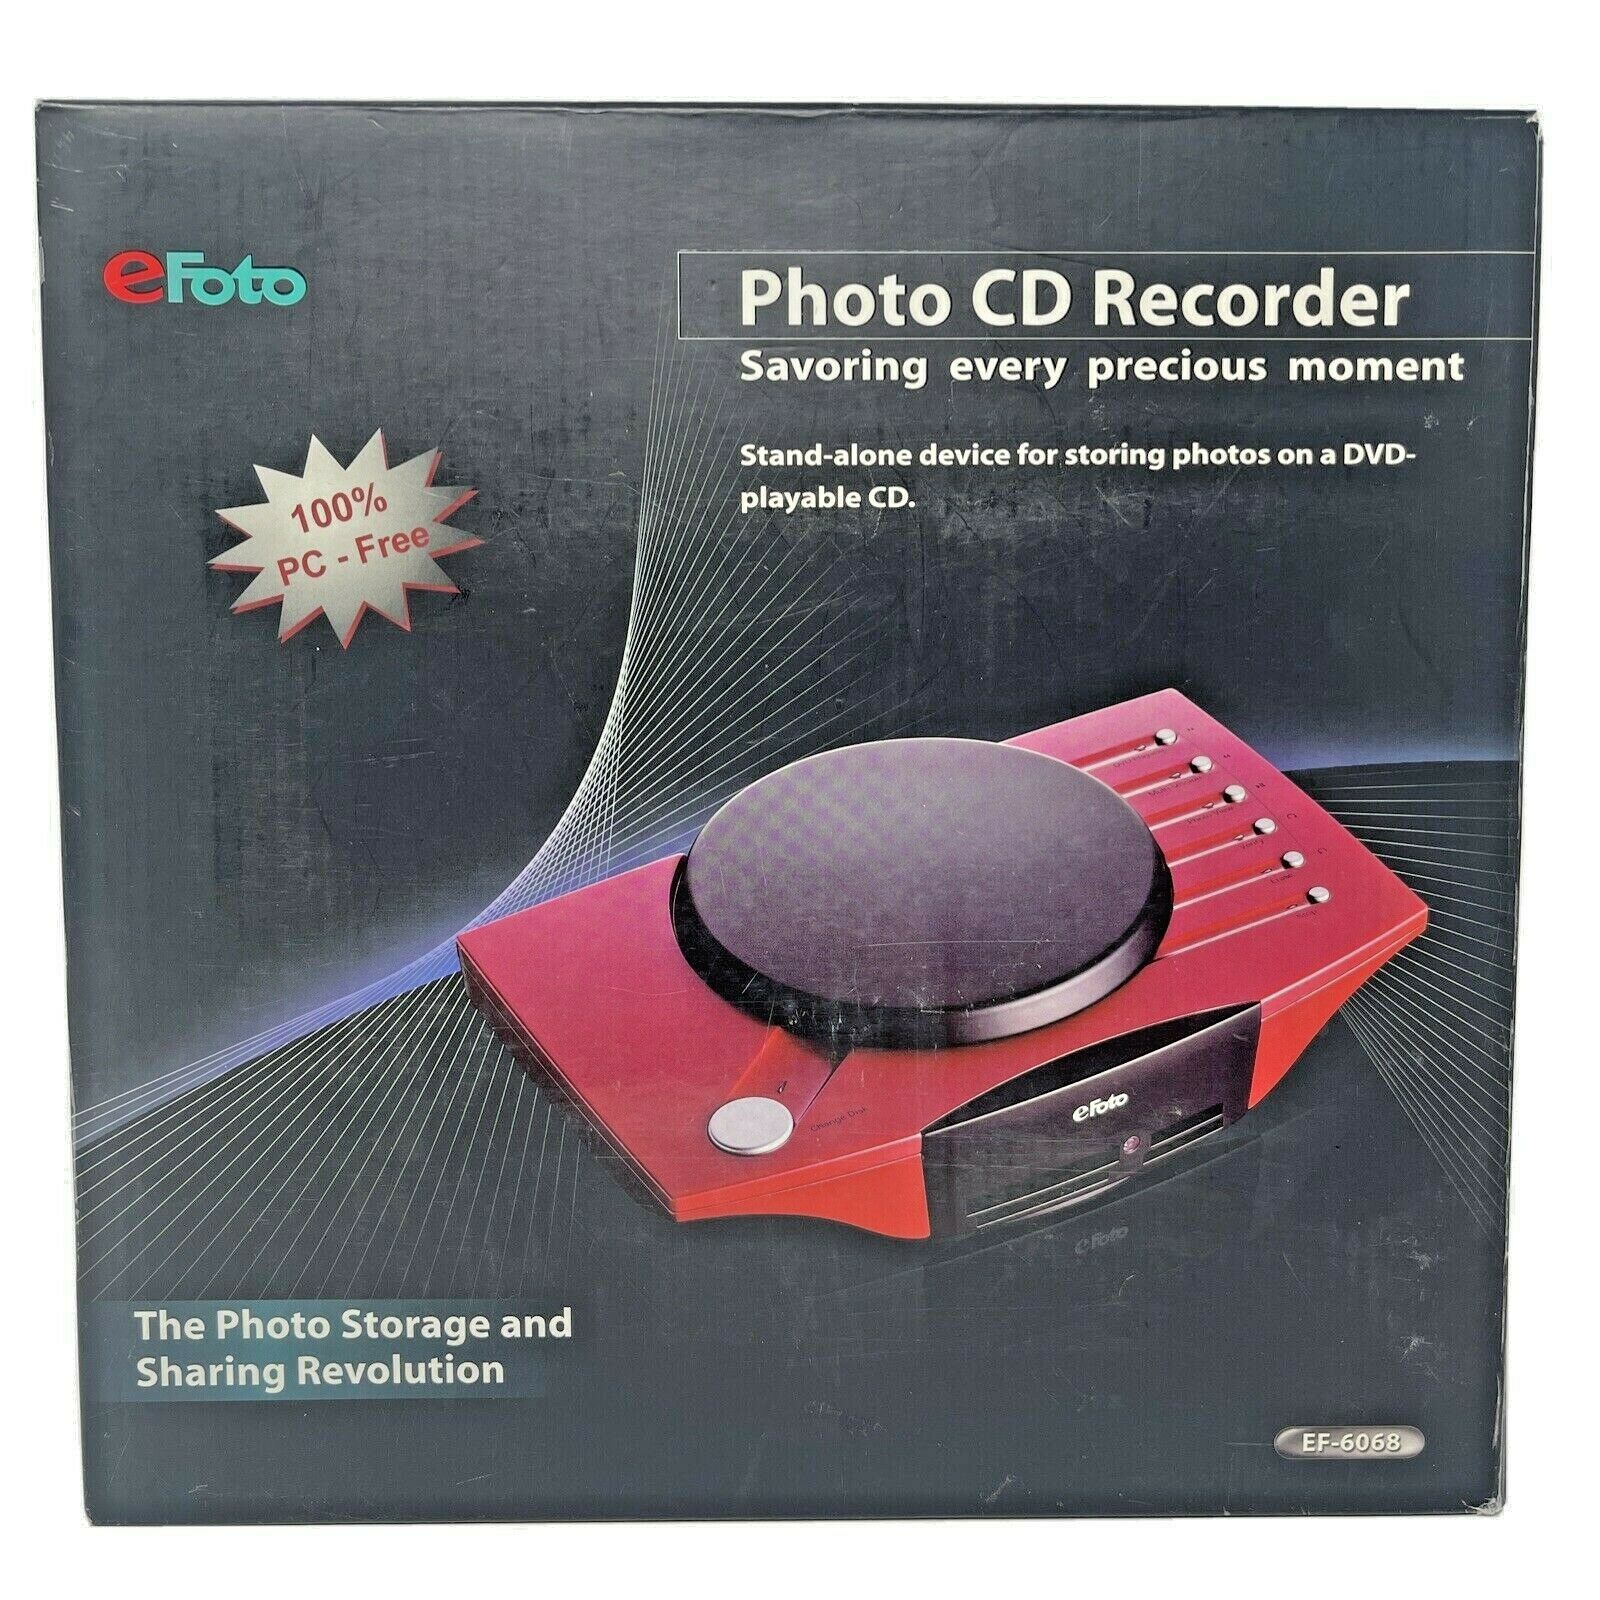 Efoto Photo Cd Recorder Stand Alone Device Storing Photos On A Dvd Playable Cd